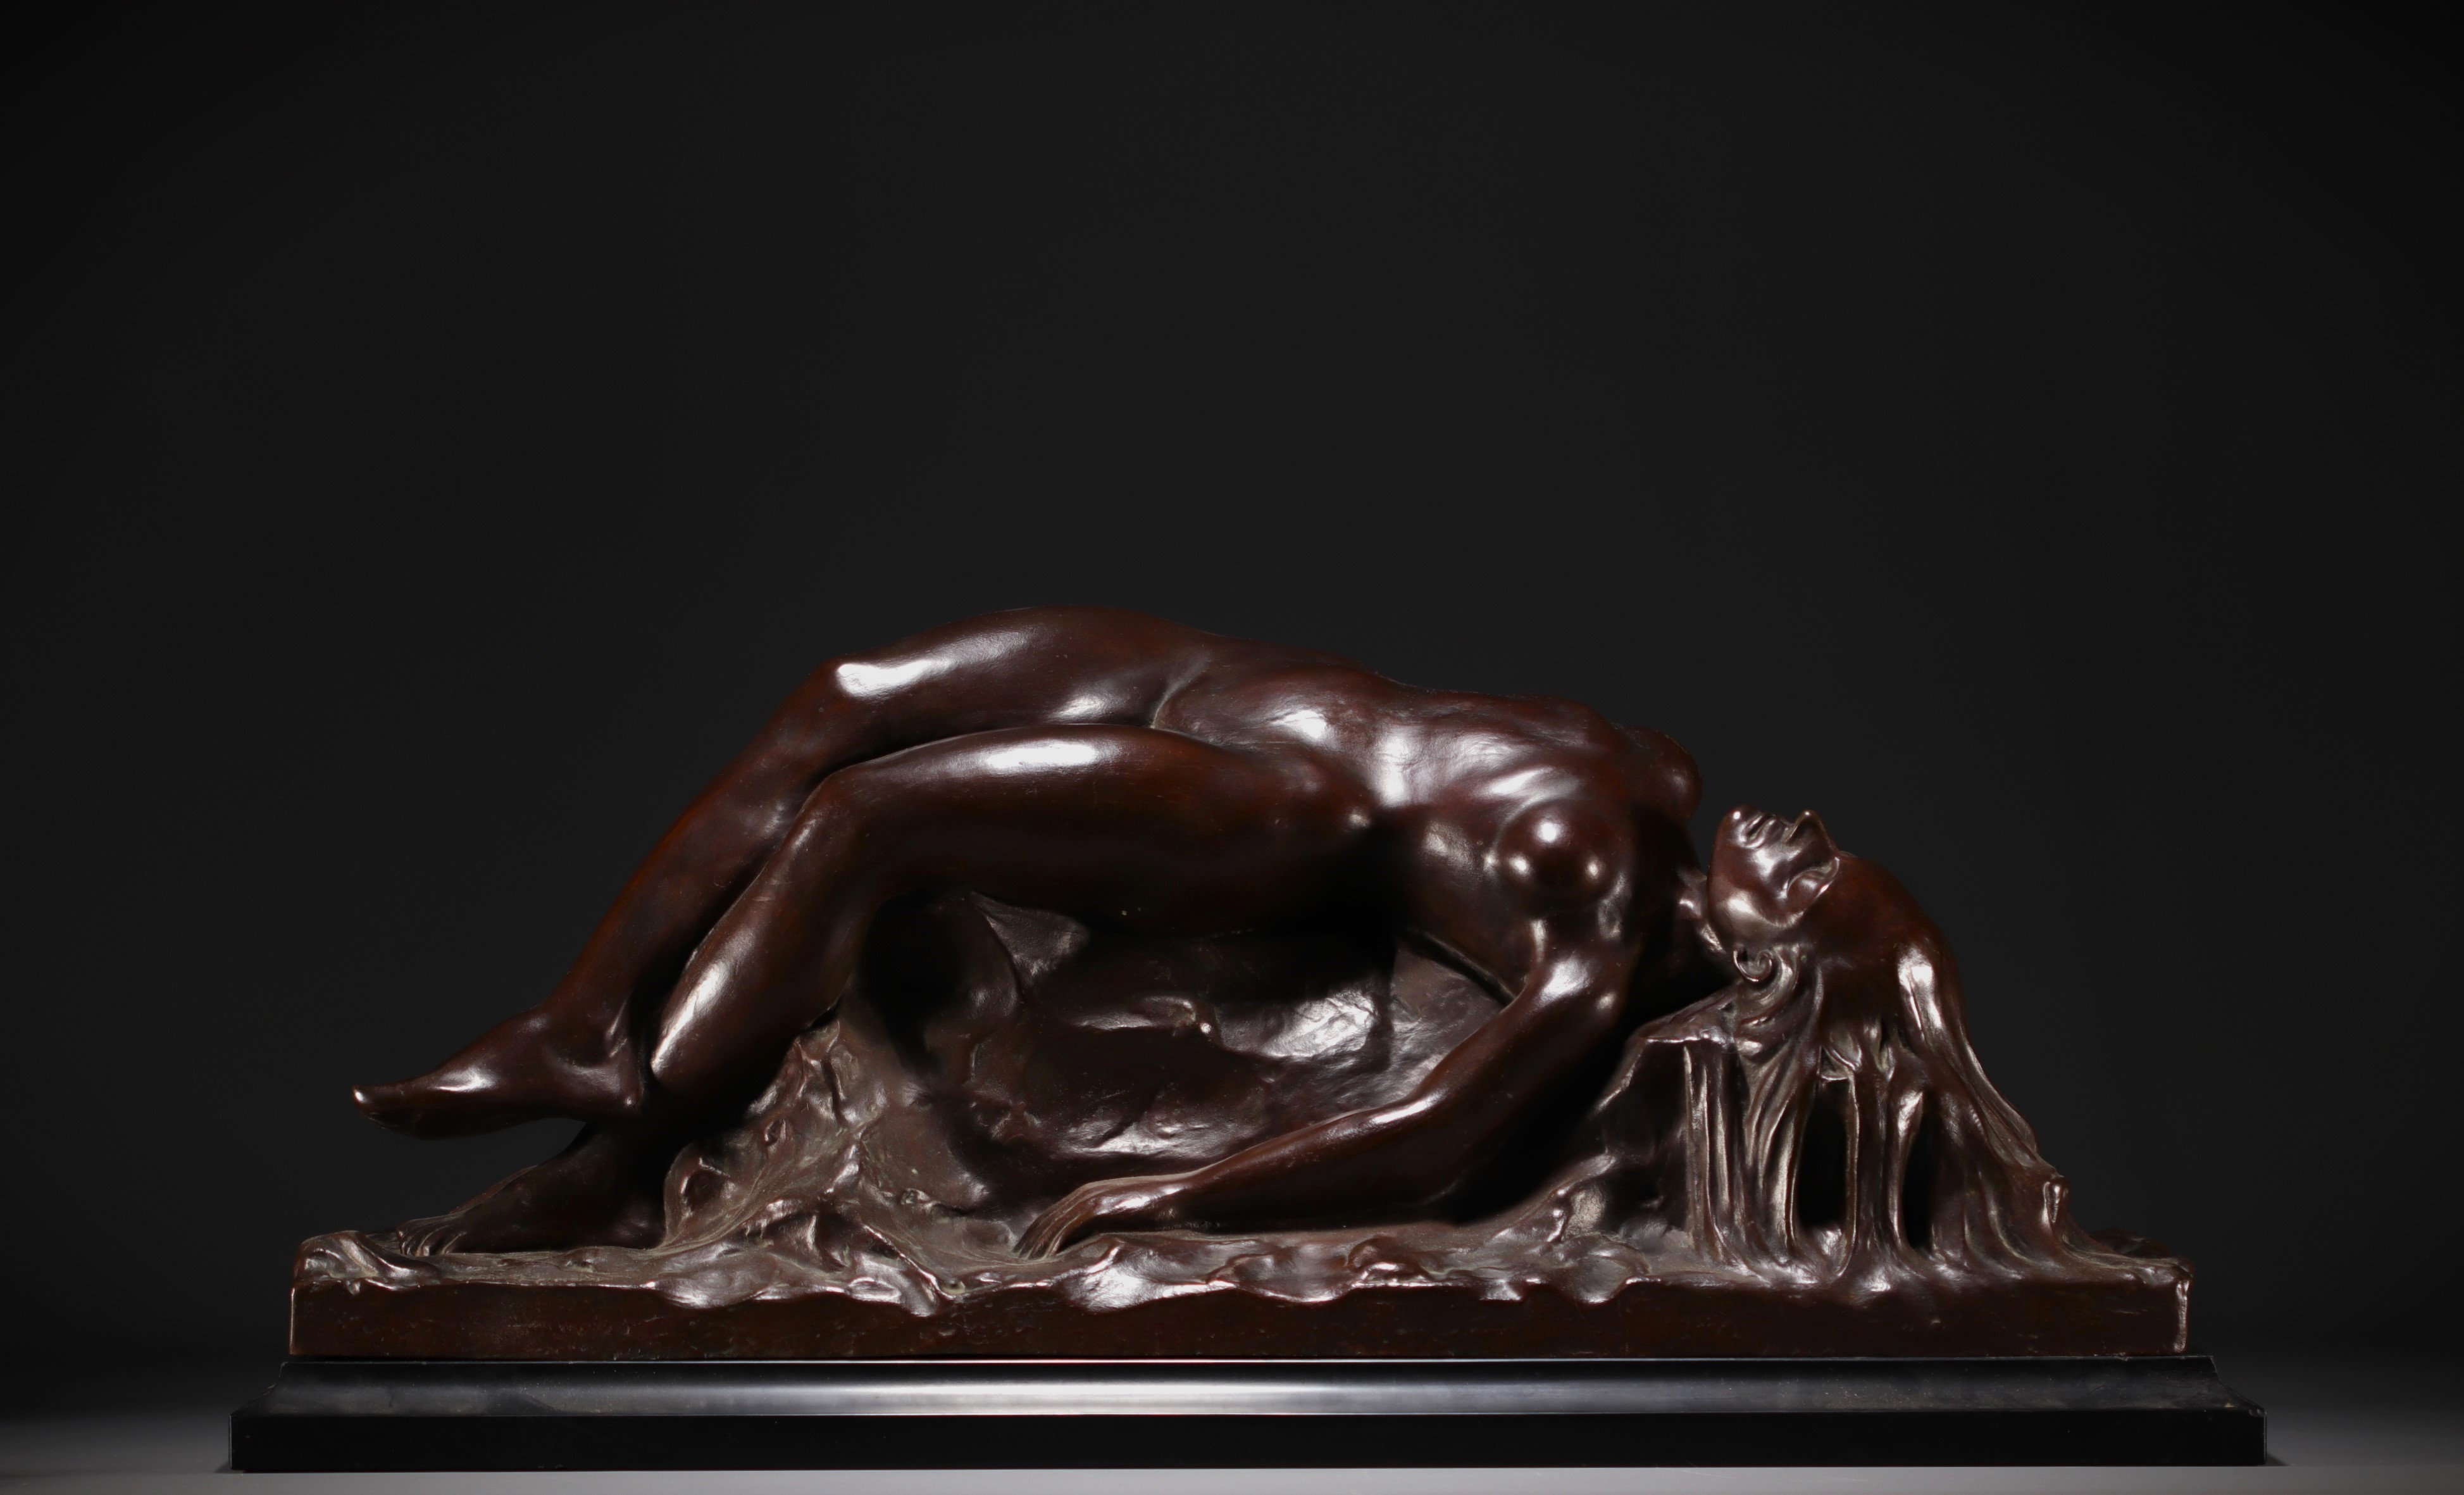 Johan DE MAEGT (1906-1987) "Reclining nude woman" Imposing sculpture in bronze with brown patina on 